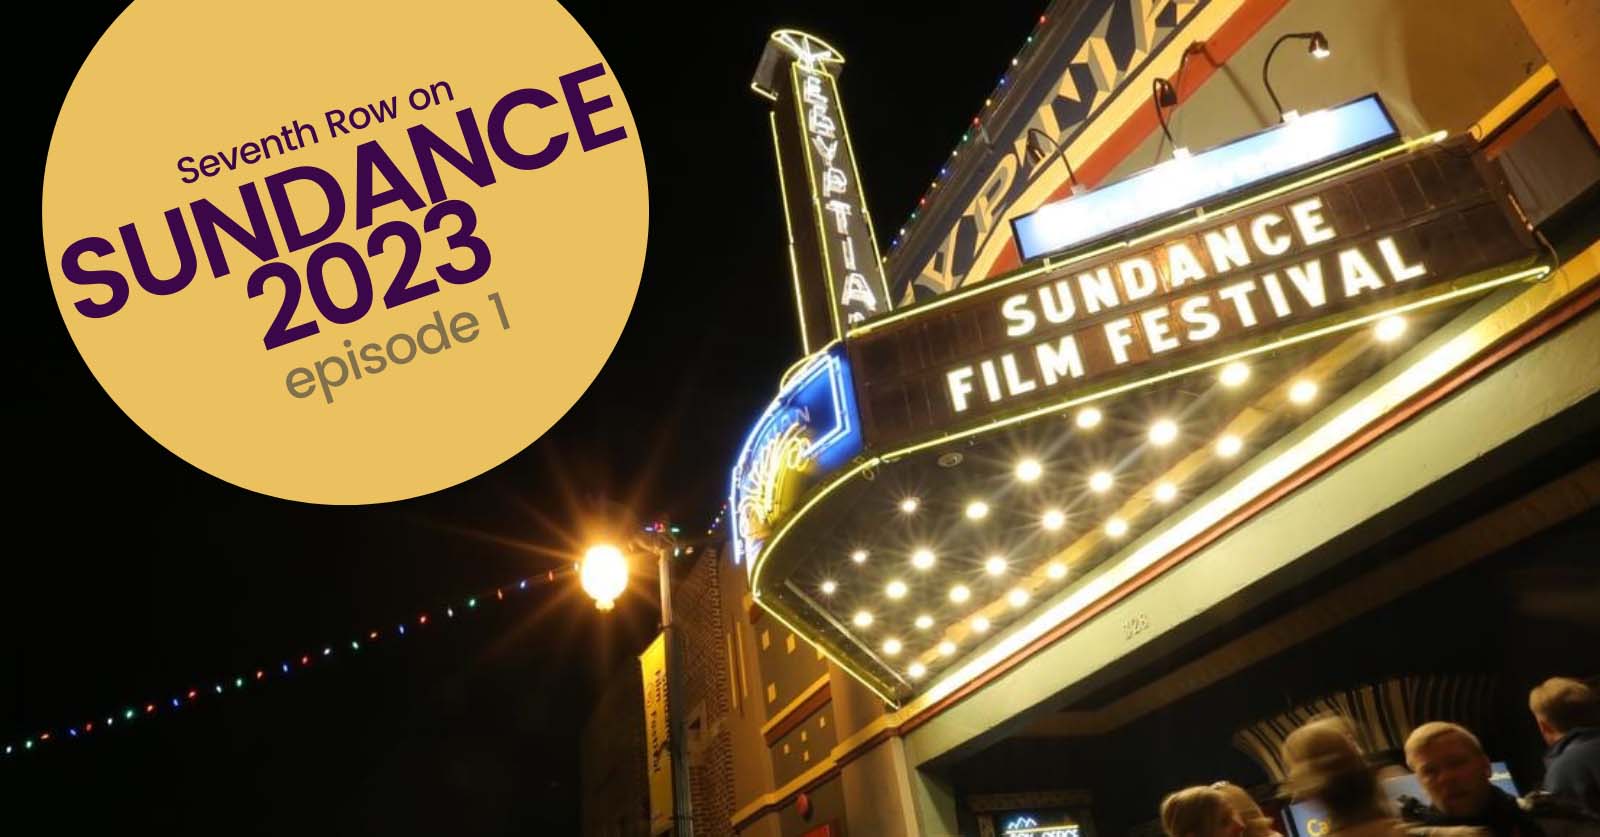 Image for the Sundance 2023 preview episode of Seventh Row's Sundance 2023 podcast season. The text "Seventh Row on Sundance 2023 episode 1" appears in a yellow circle on the left-hand side. The background image is of the marquee at the Egyptian Theatre in Park City with the words "Sundance Film Festival" on it.